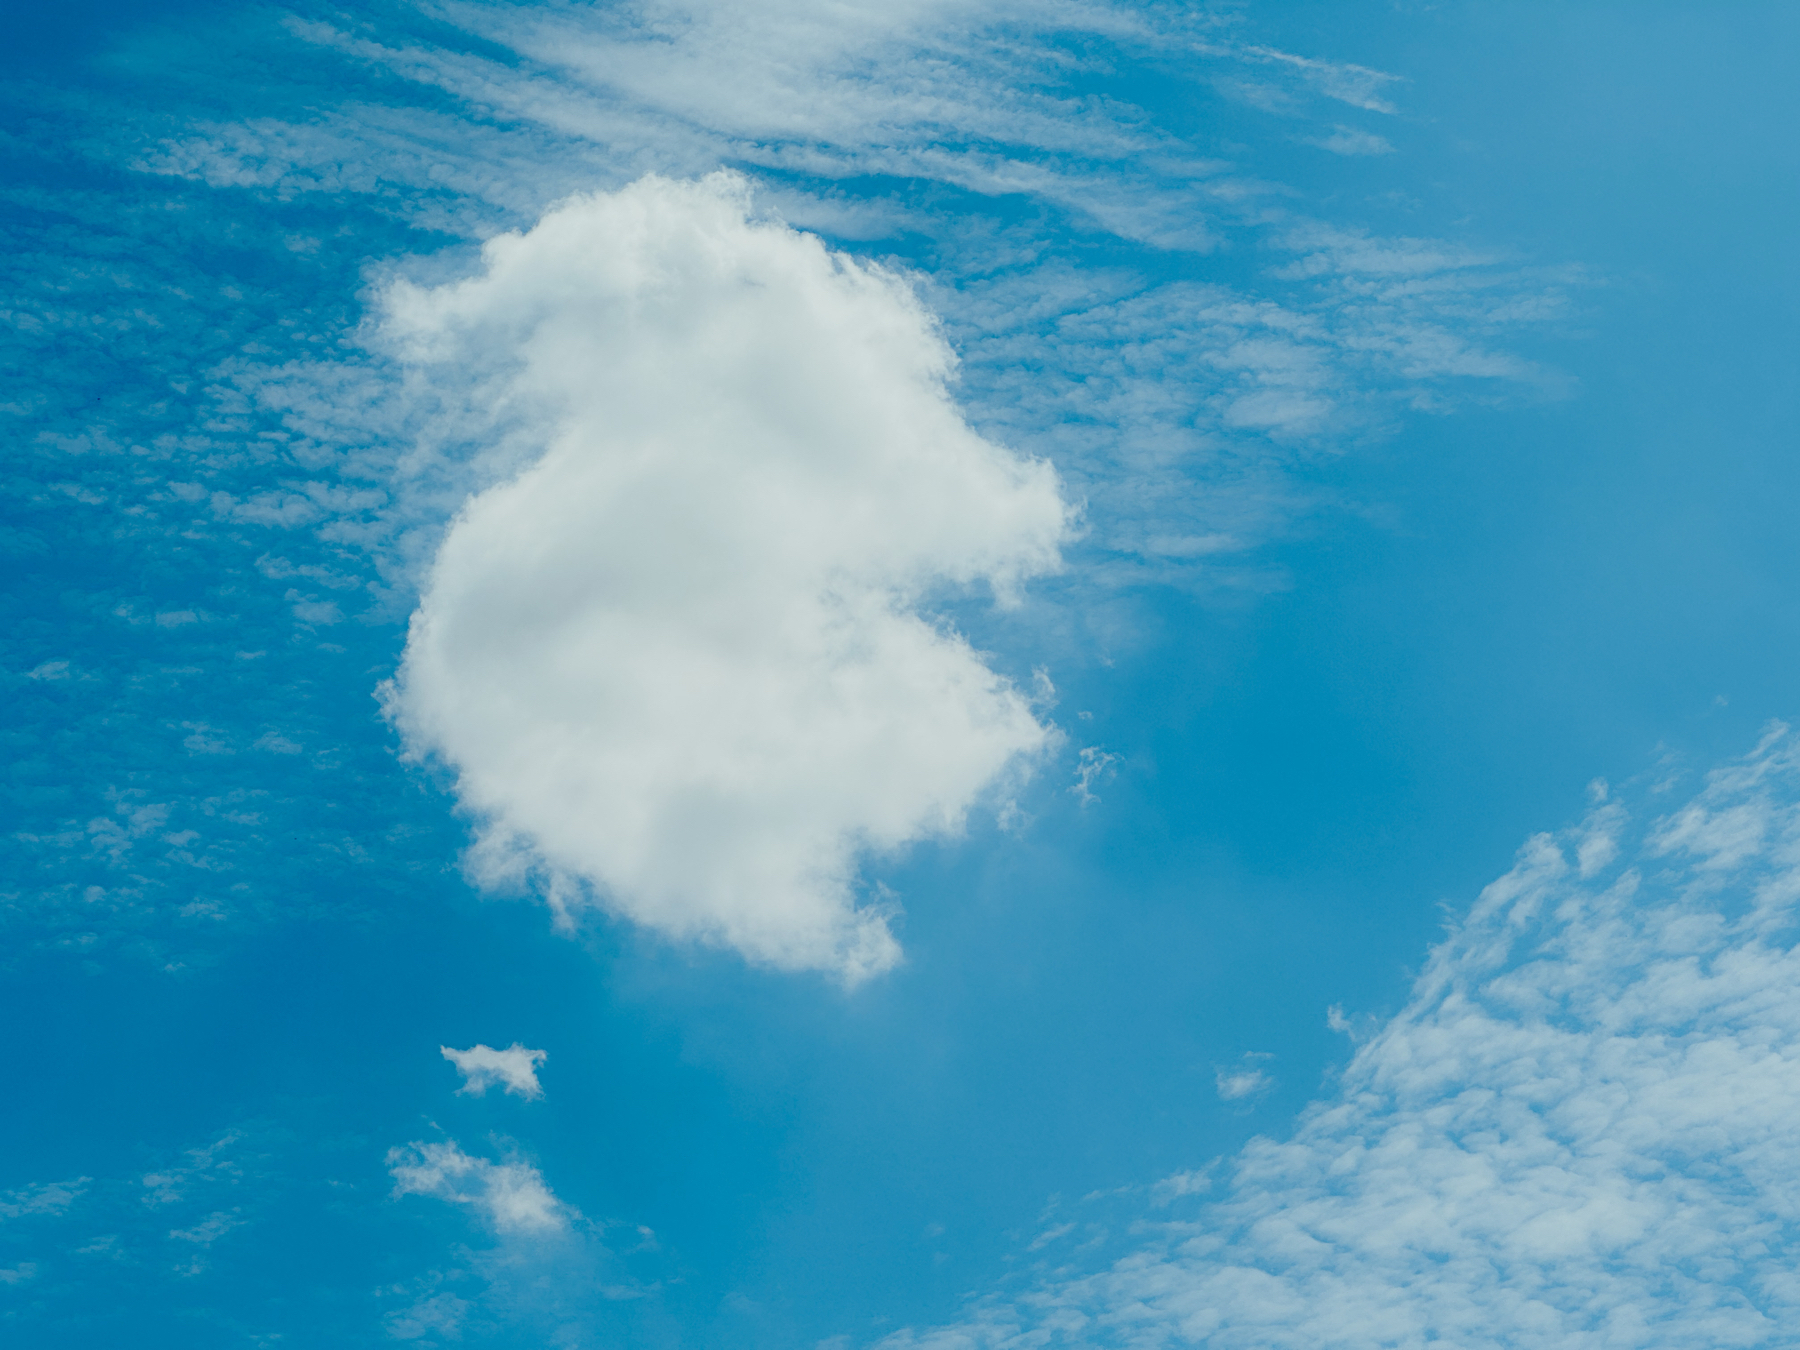 A puffy cloud with blue skies and distant wispy clouds behind it.